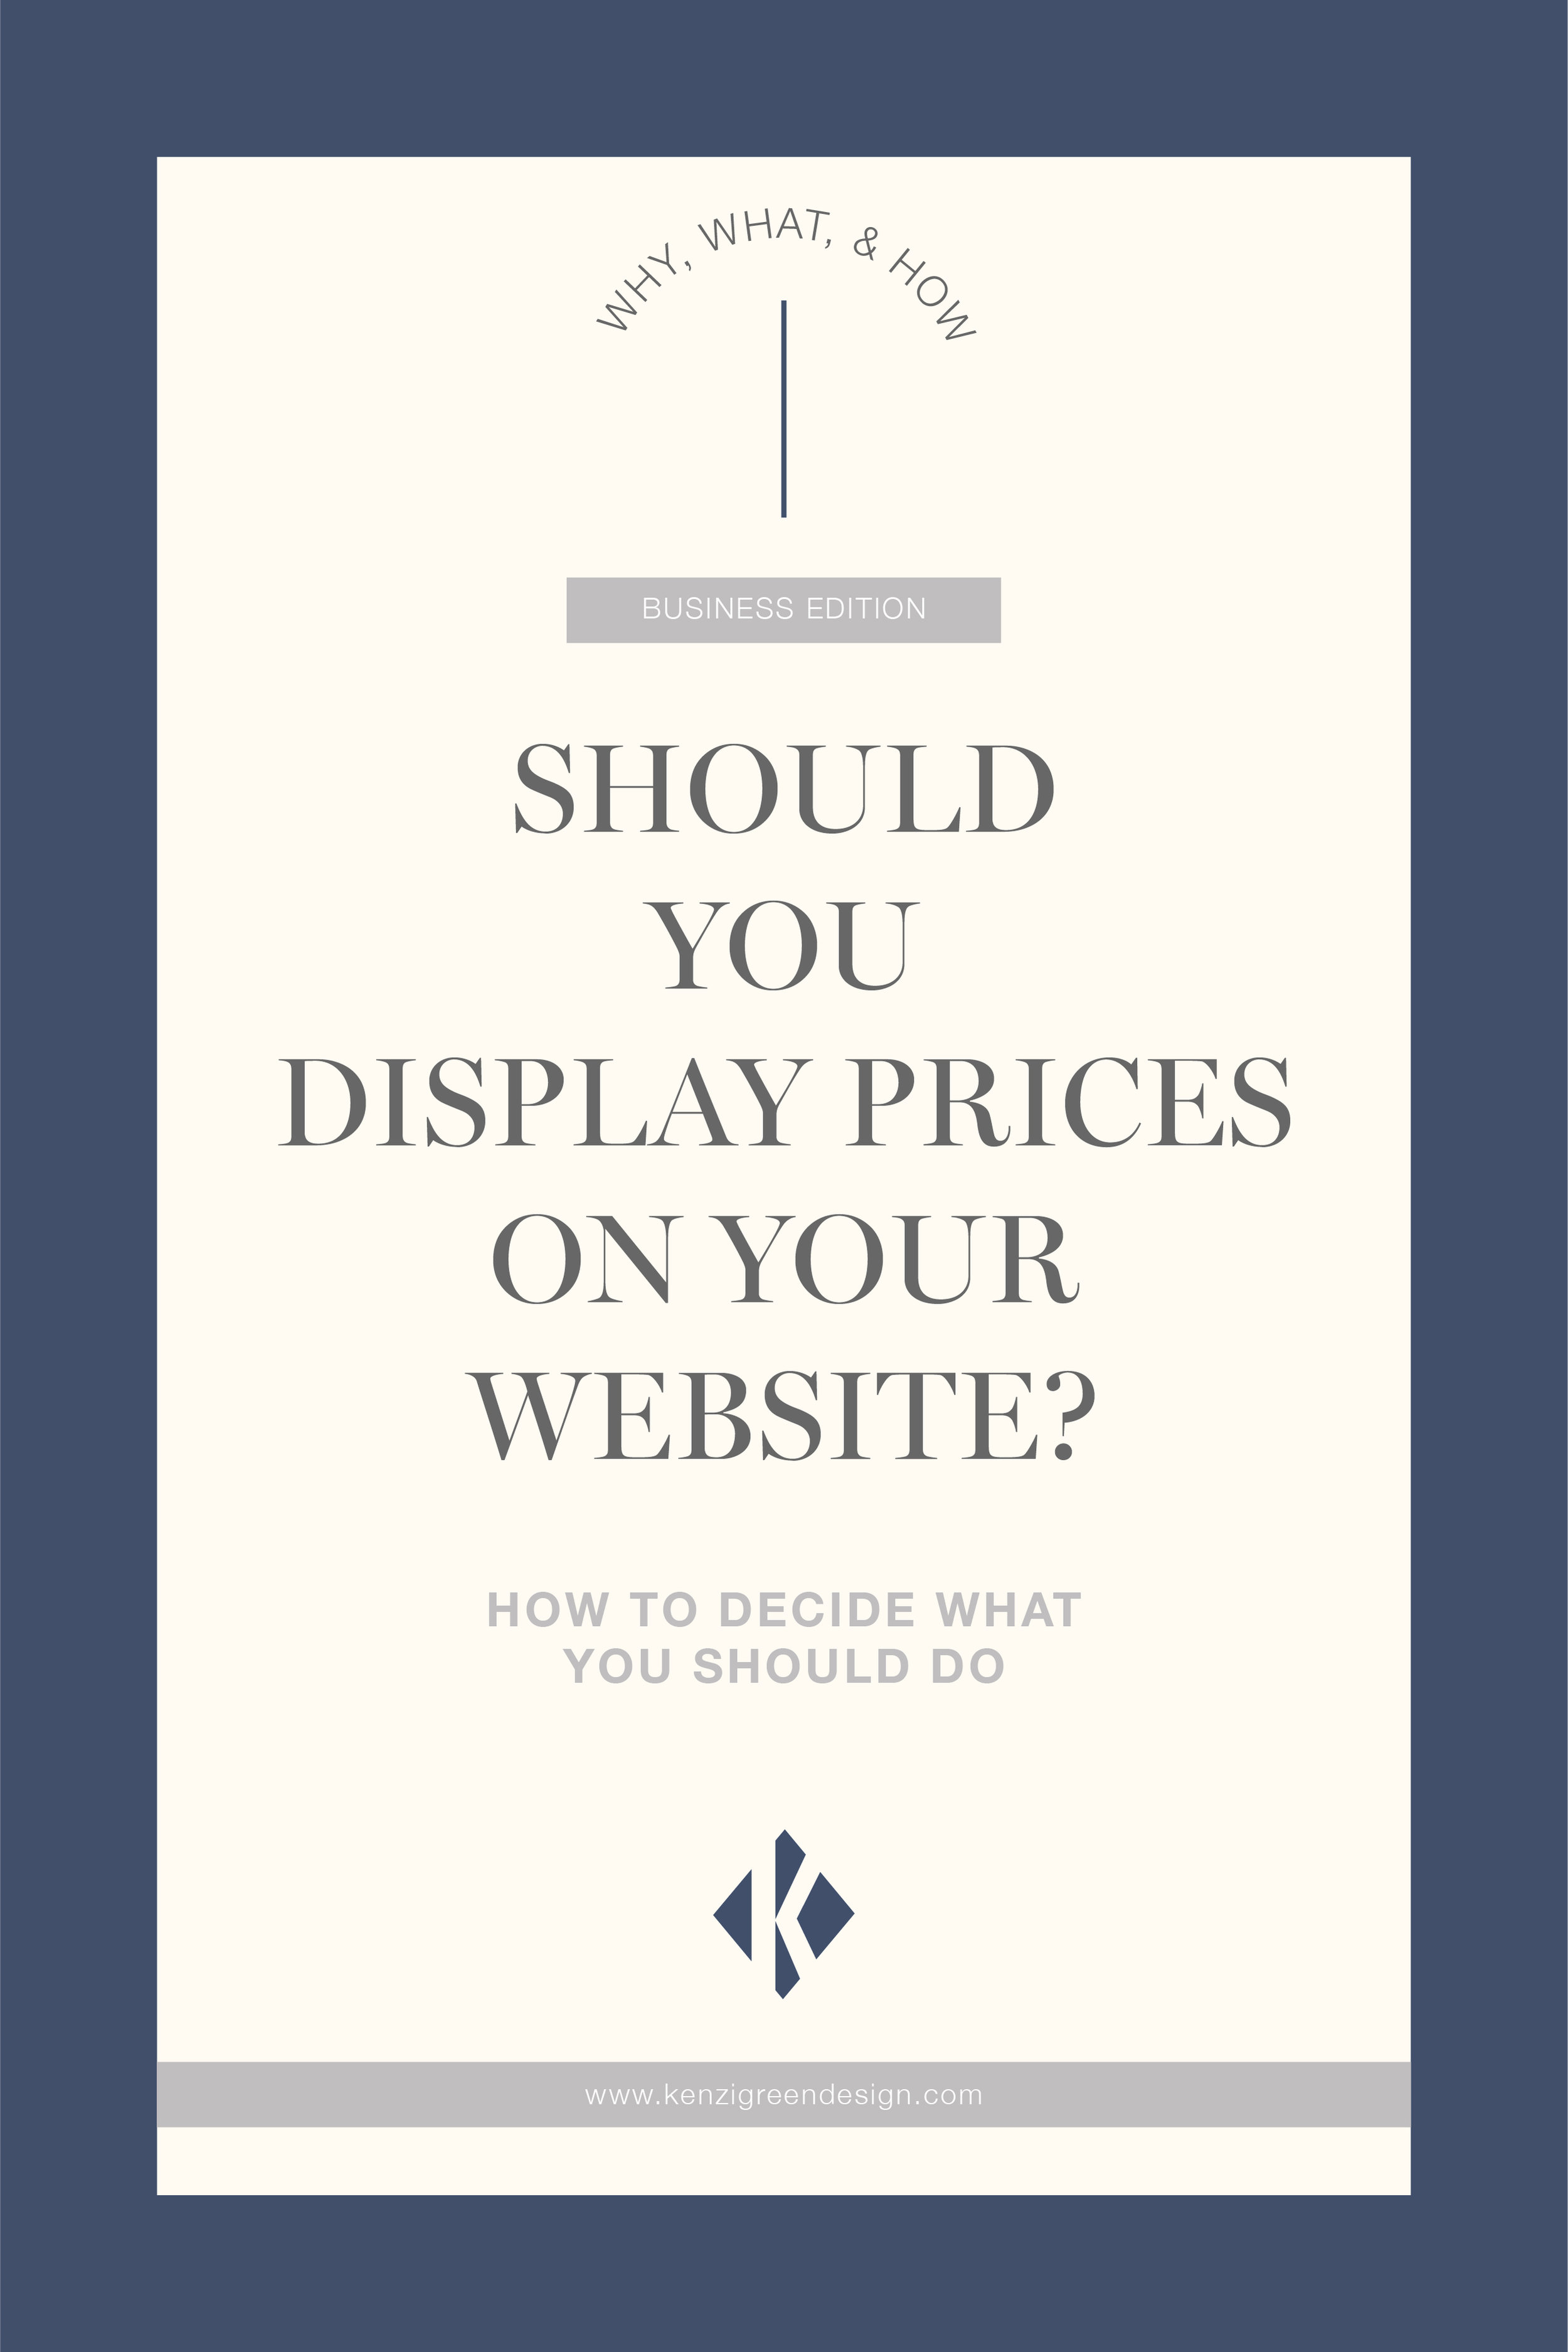 Should you display prices on your website? How to decide what you should do. #websitetips #businesstips #biztips